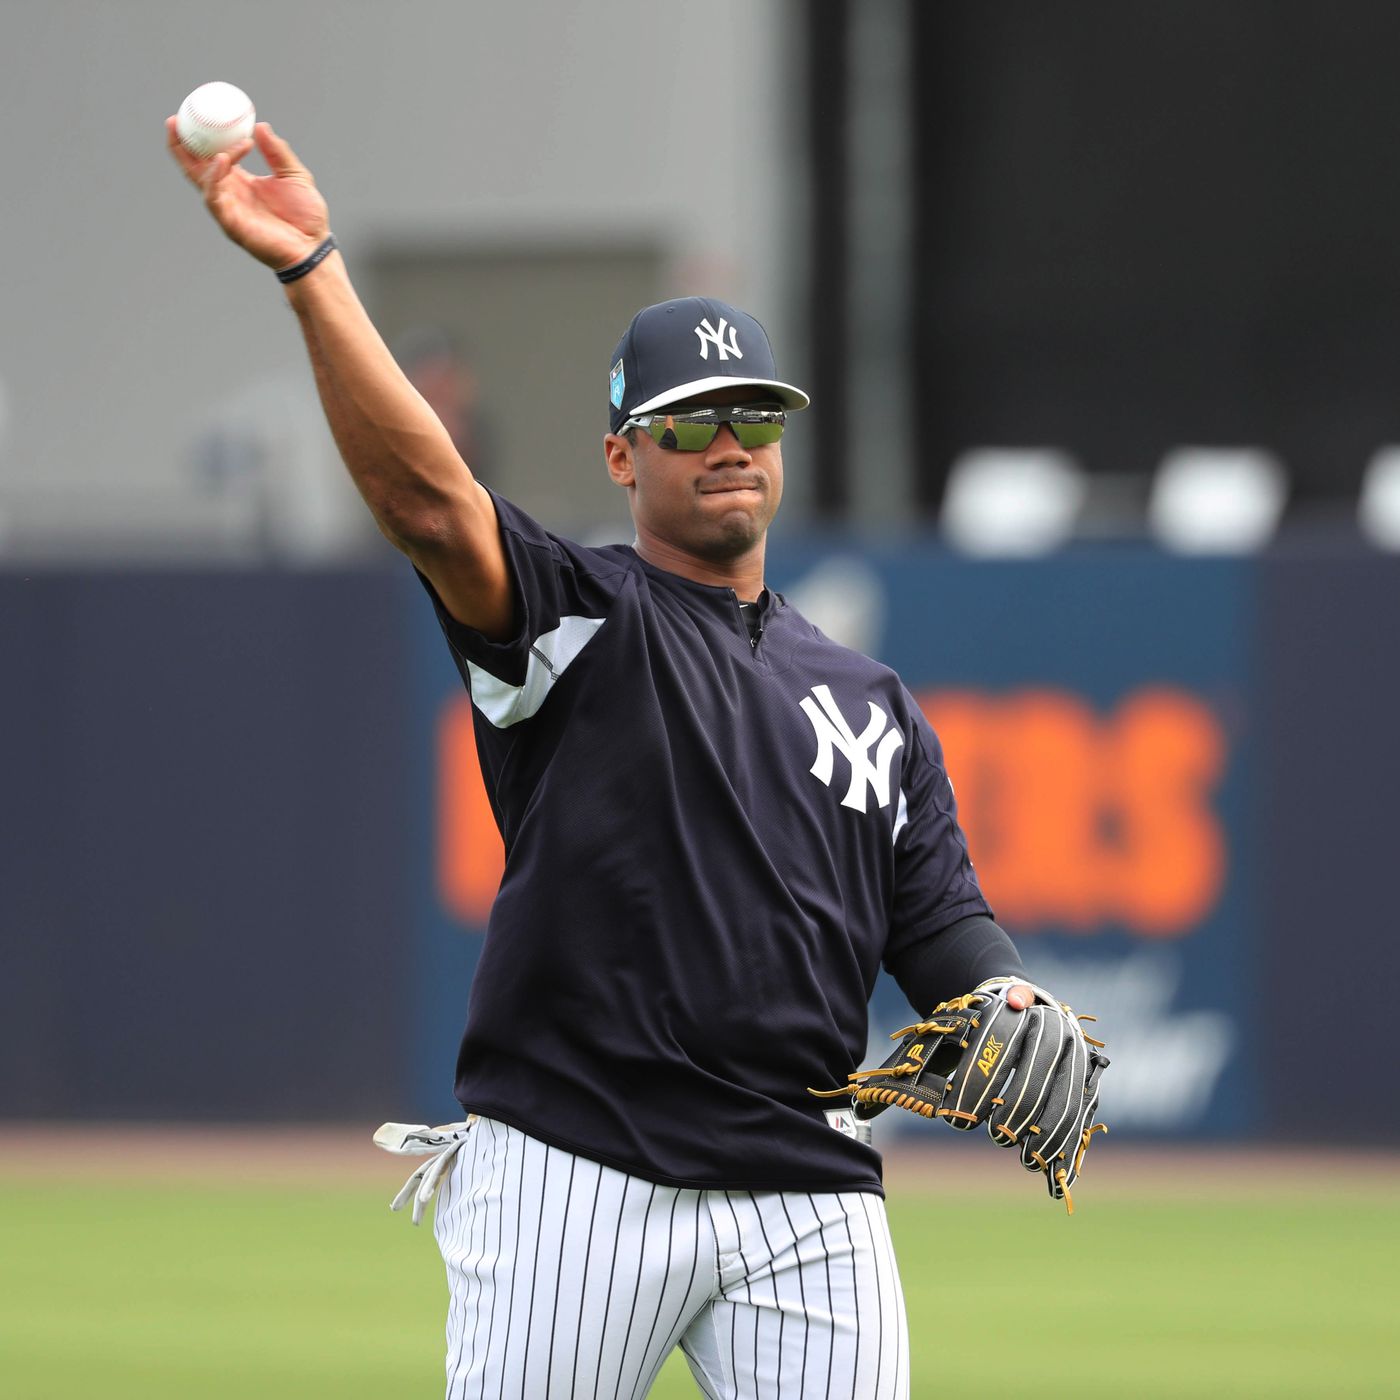 Russell Wilson looks good in the video of his at-bat for the Yankees ...